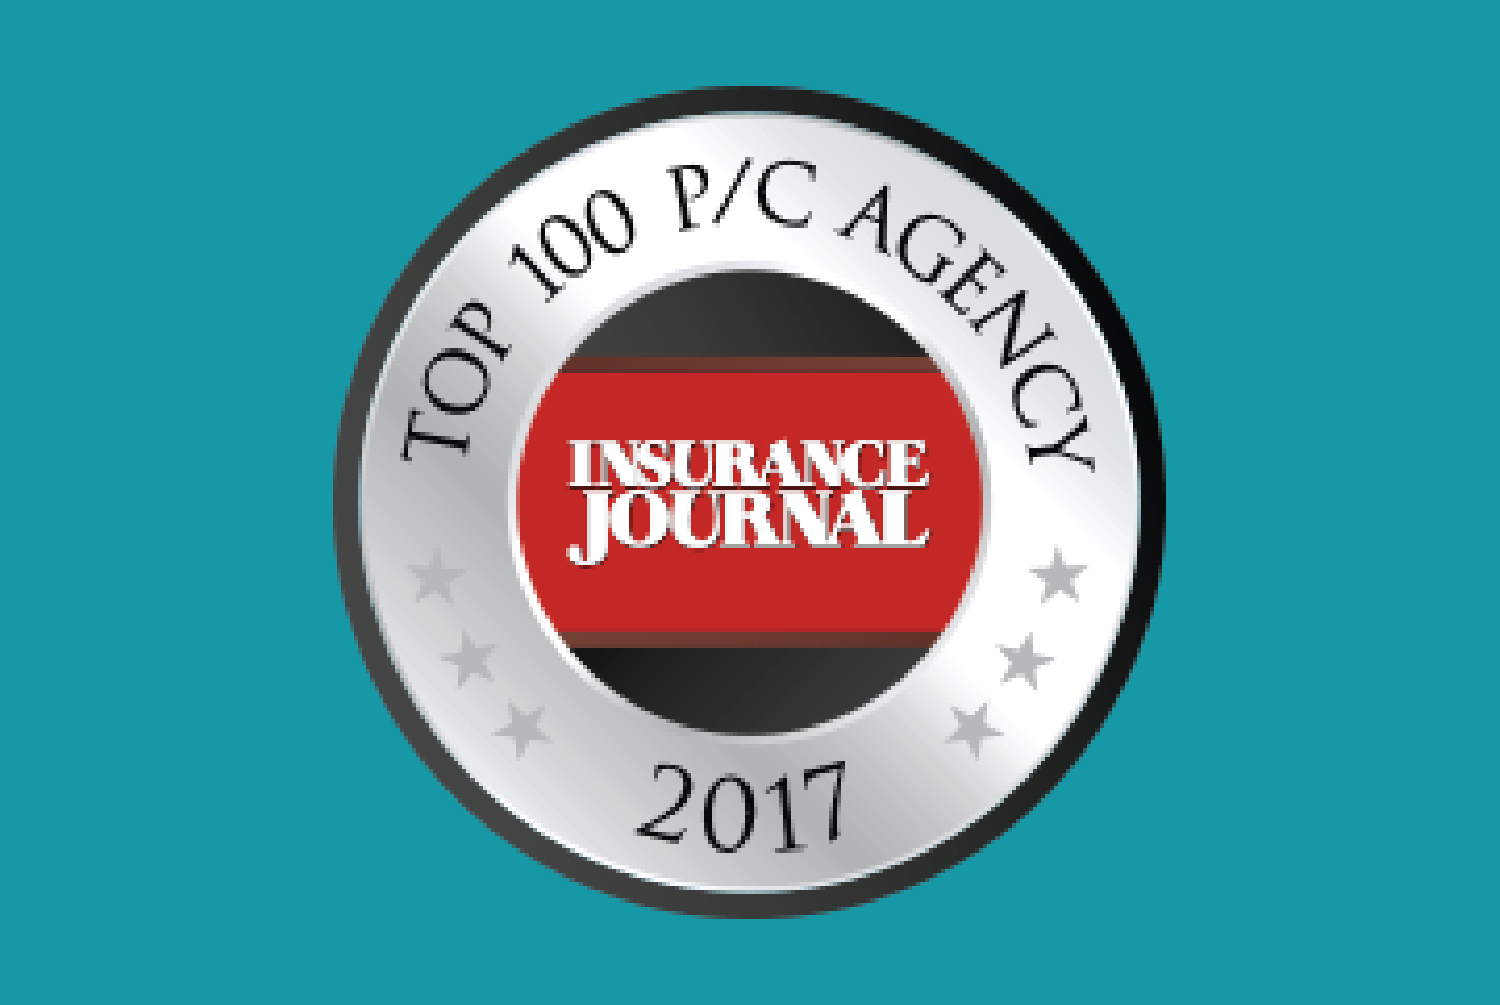 JGS Insurance Among Top 100 Property/Casualty Agencies by Insurance Journal